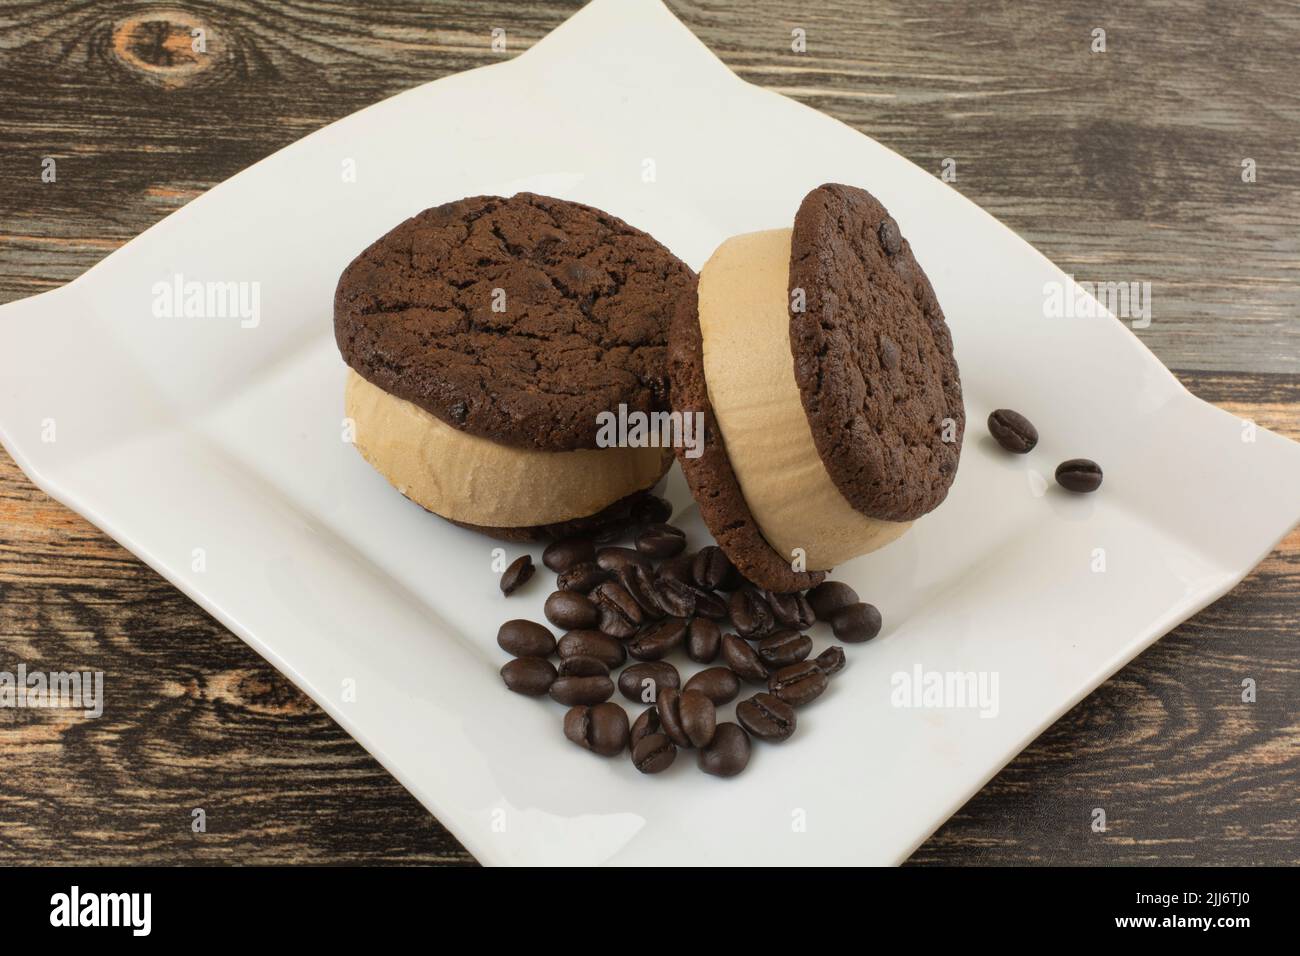 Coffee ice cream sandwich with chocolate cookies on white dessert plate with coffee beans Stock Photo